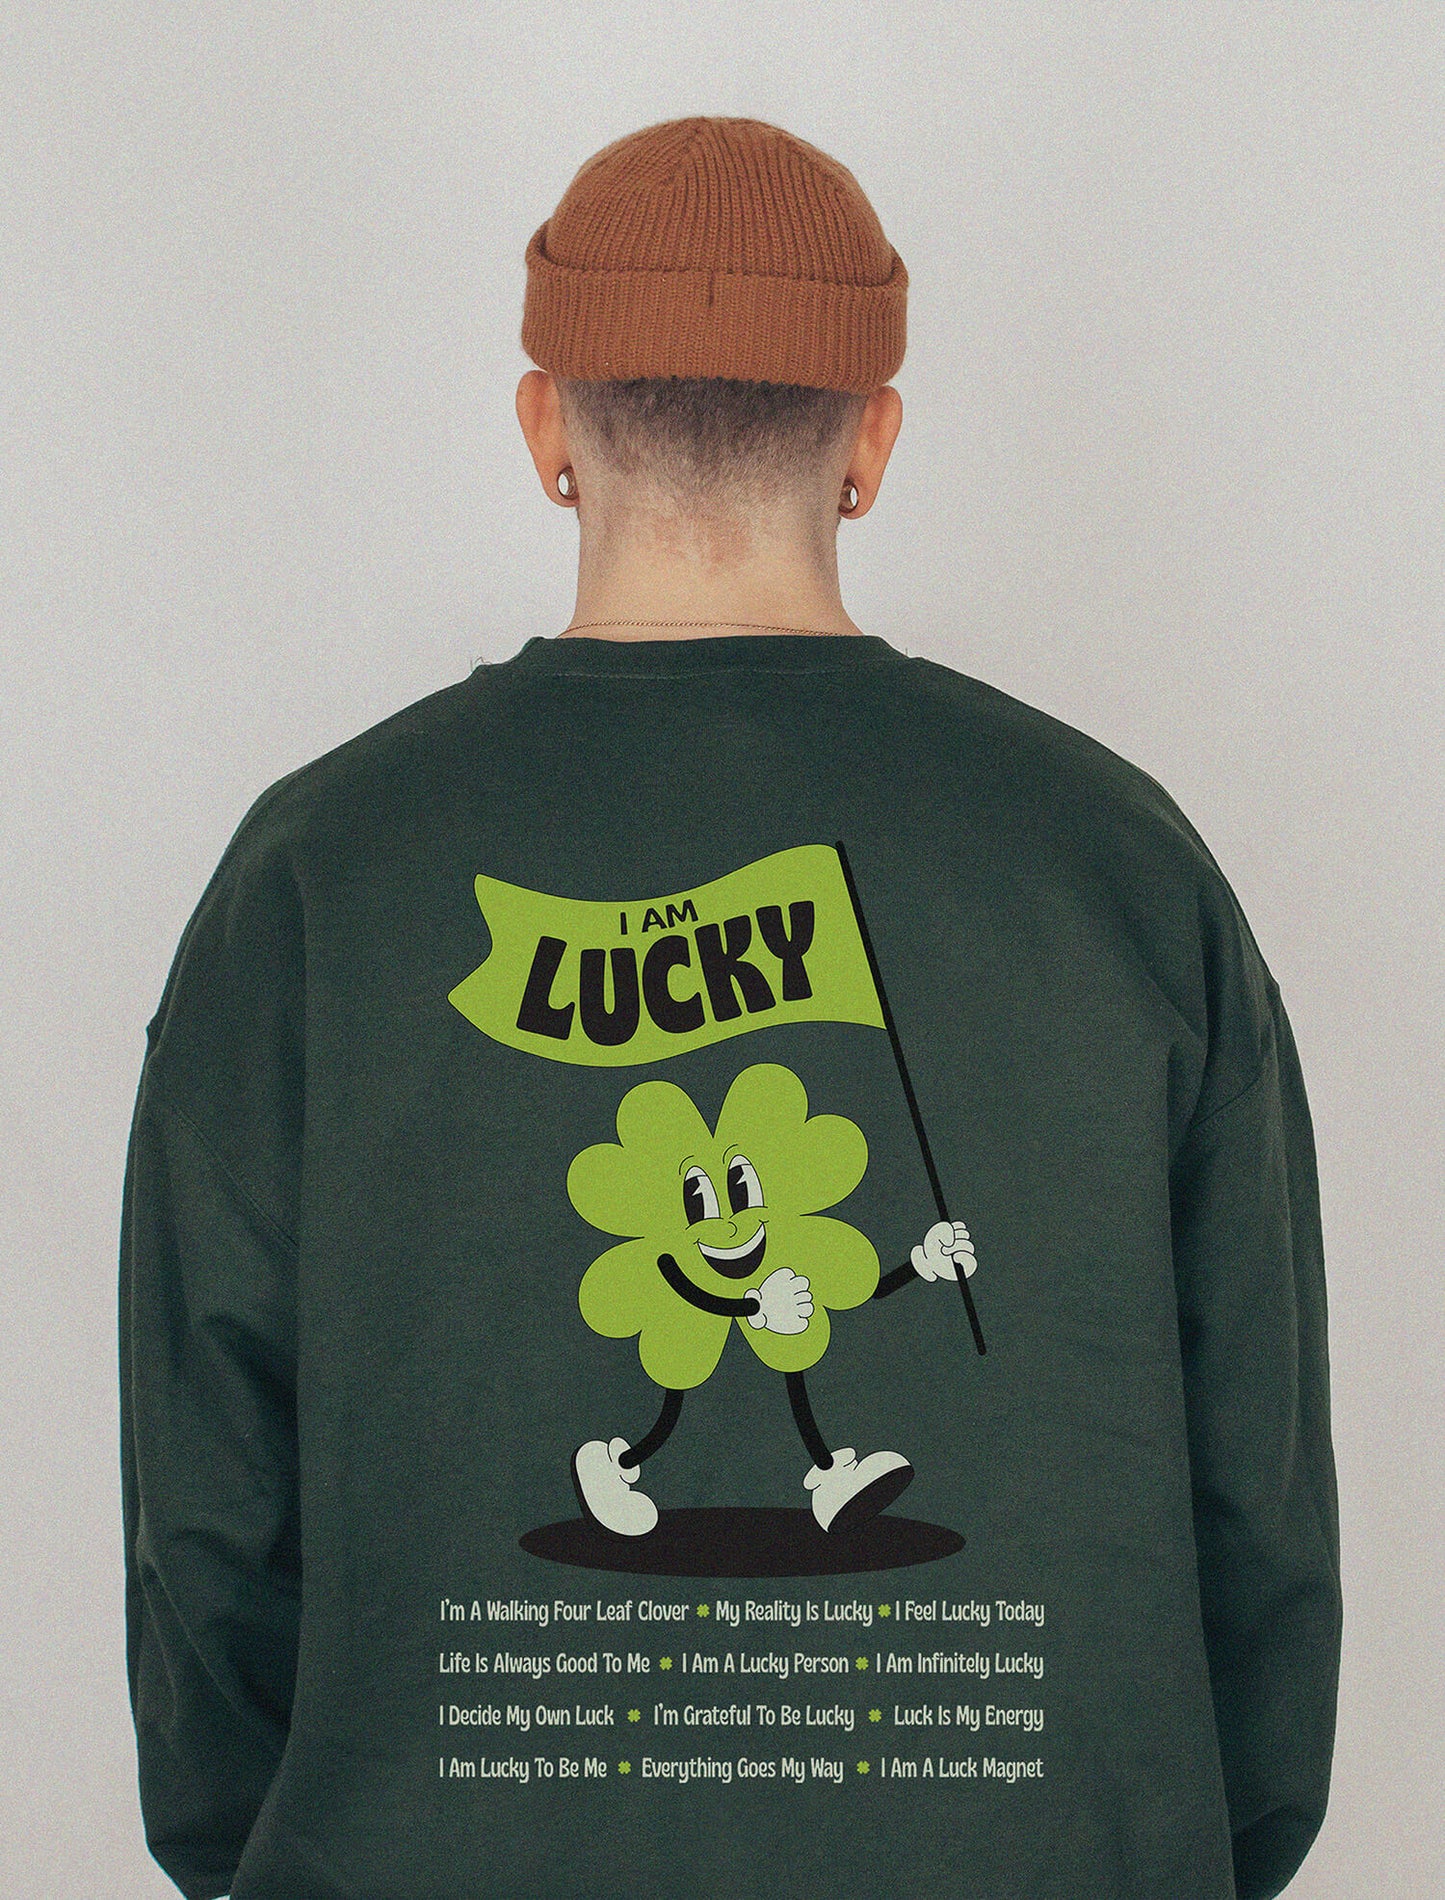 I AM LUCKY AFFIRMATION SWEATER